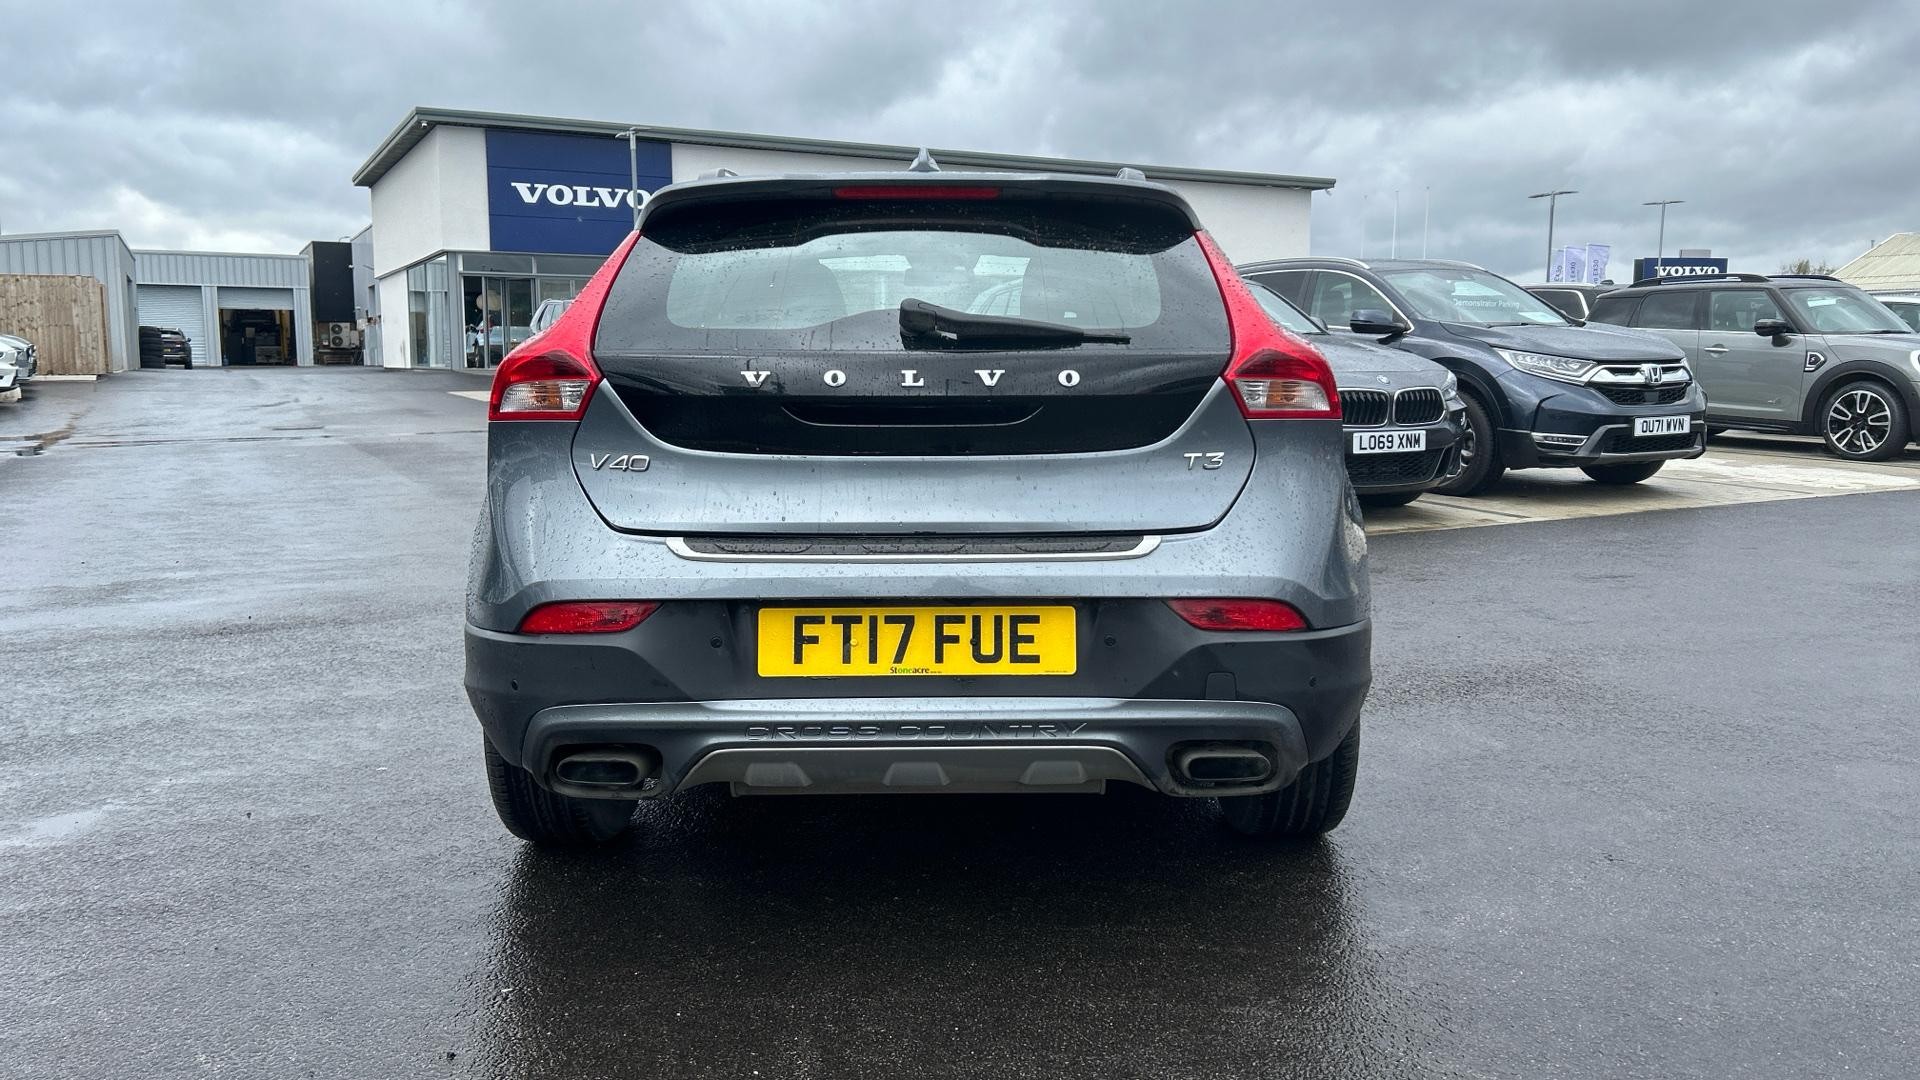 Volvo V40 Cross Country 1.5 T3 Pro Auto Euro 6 (s/s) 5dr (FT17FUE) image 12